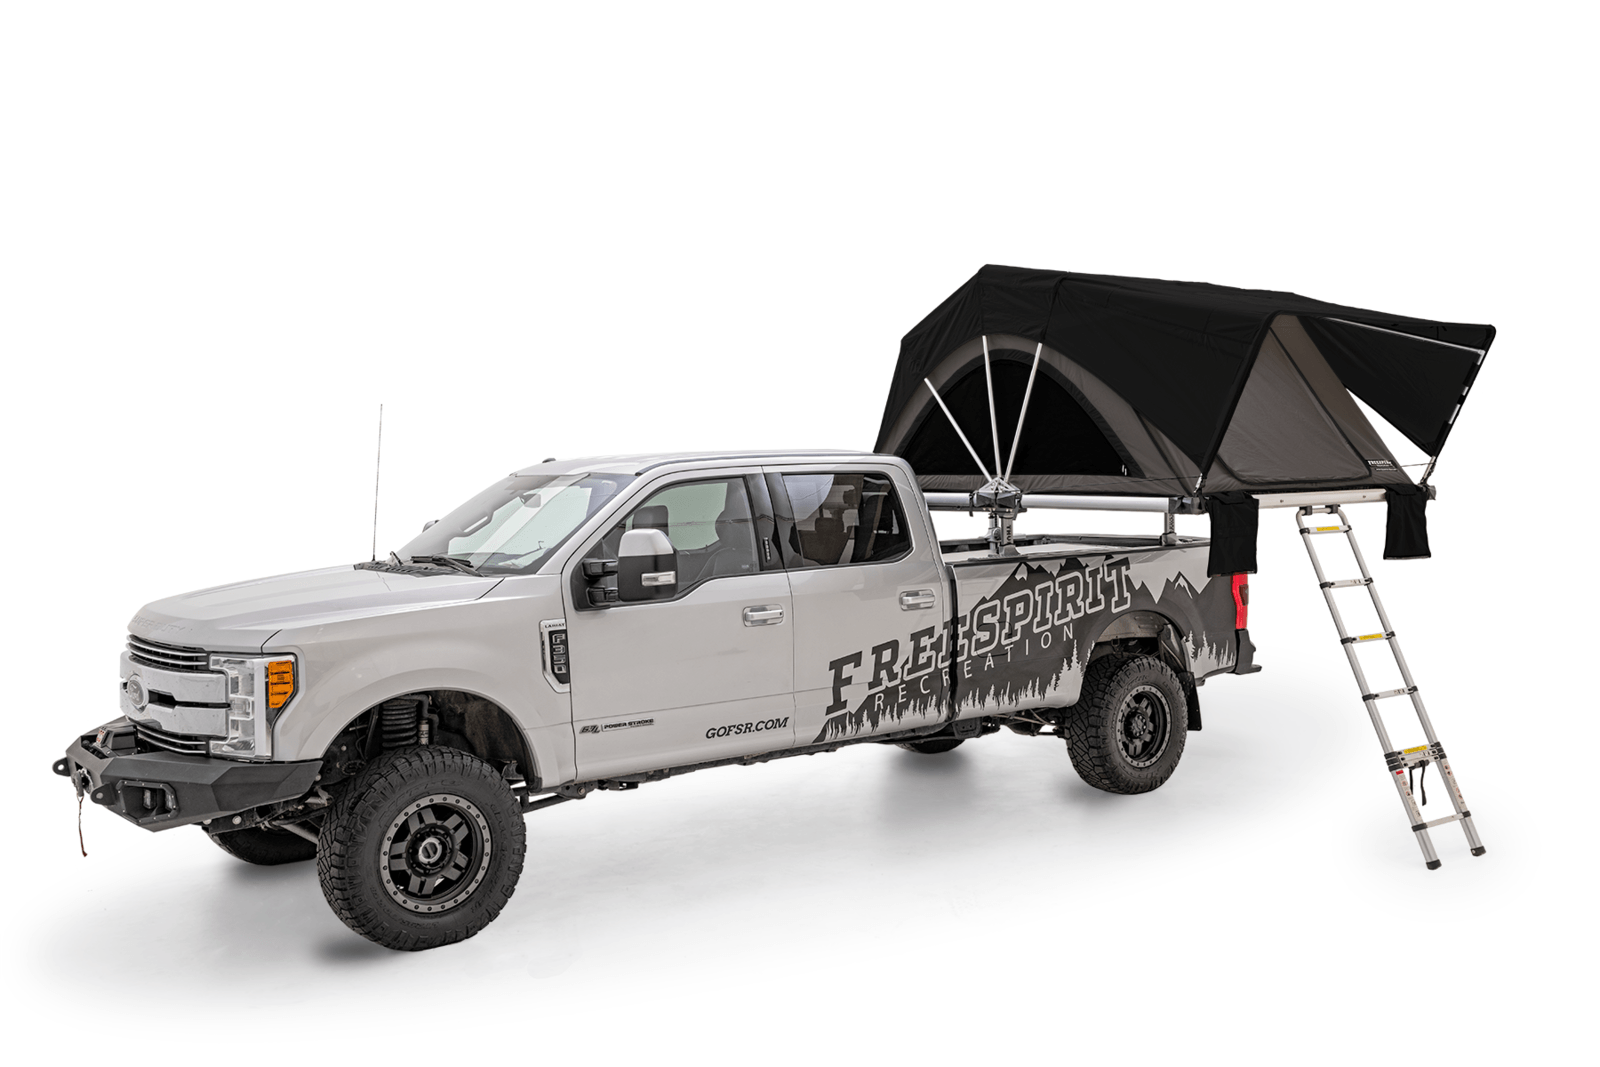 high-country-series-80-roof-top-tent-grey-black-4-season-left-RTHC80305_1800x1800.png